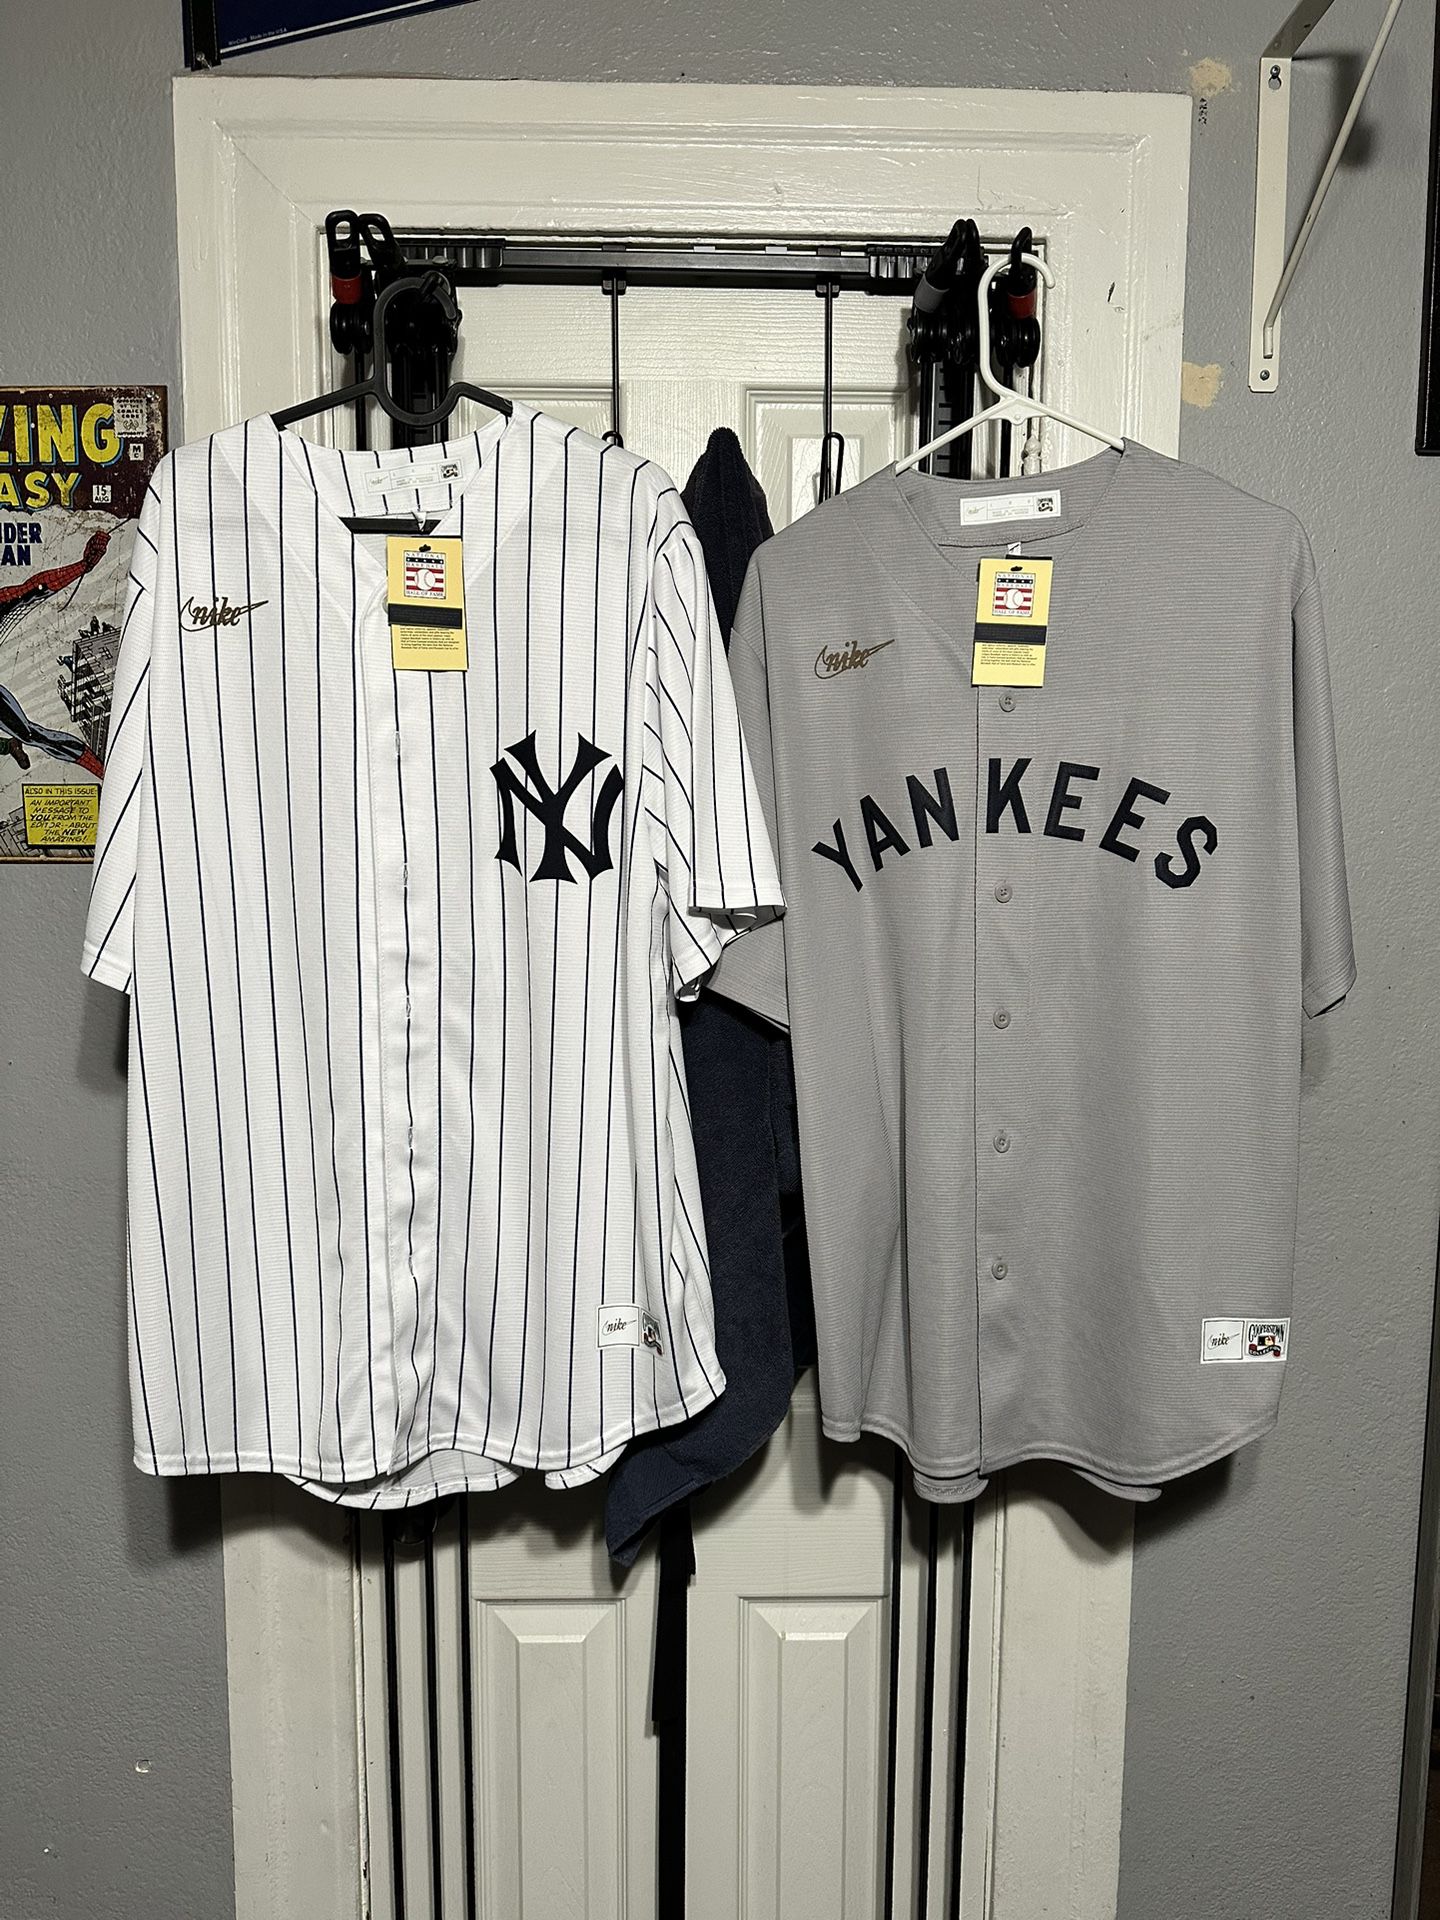 Babe Ruth & Mickie Mantle Jerseys